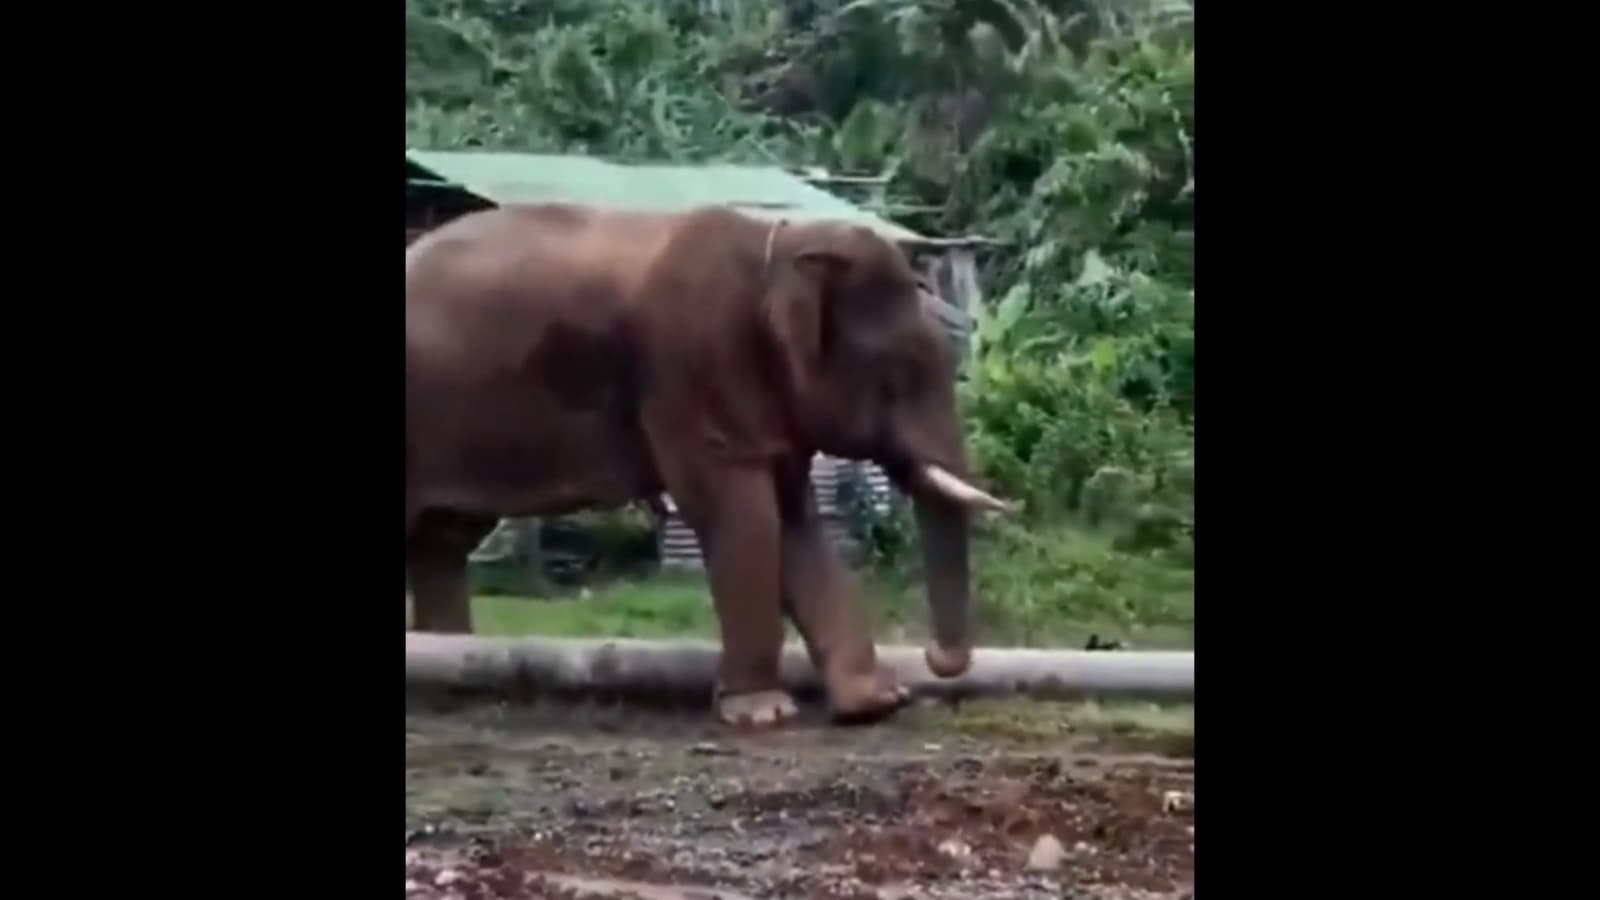 Elephant’s DIY toe cleaning technique using a stick captured on camera. Watch